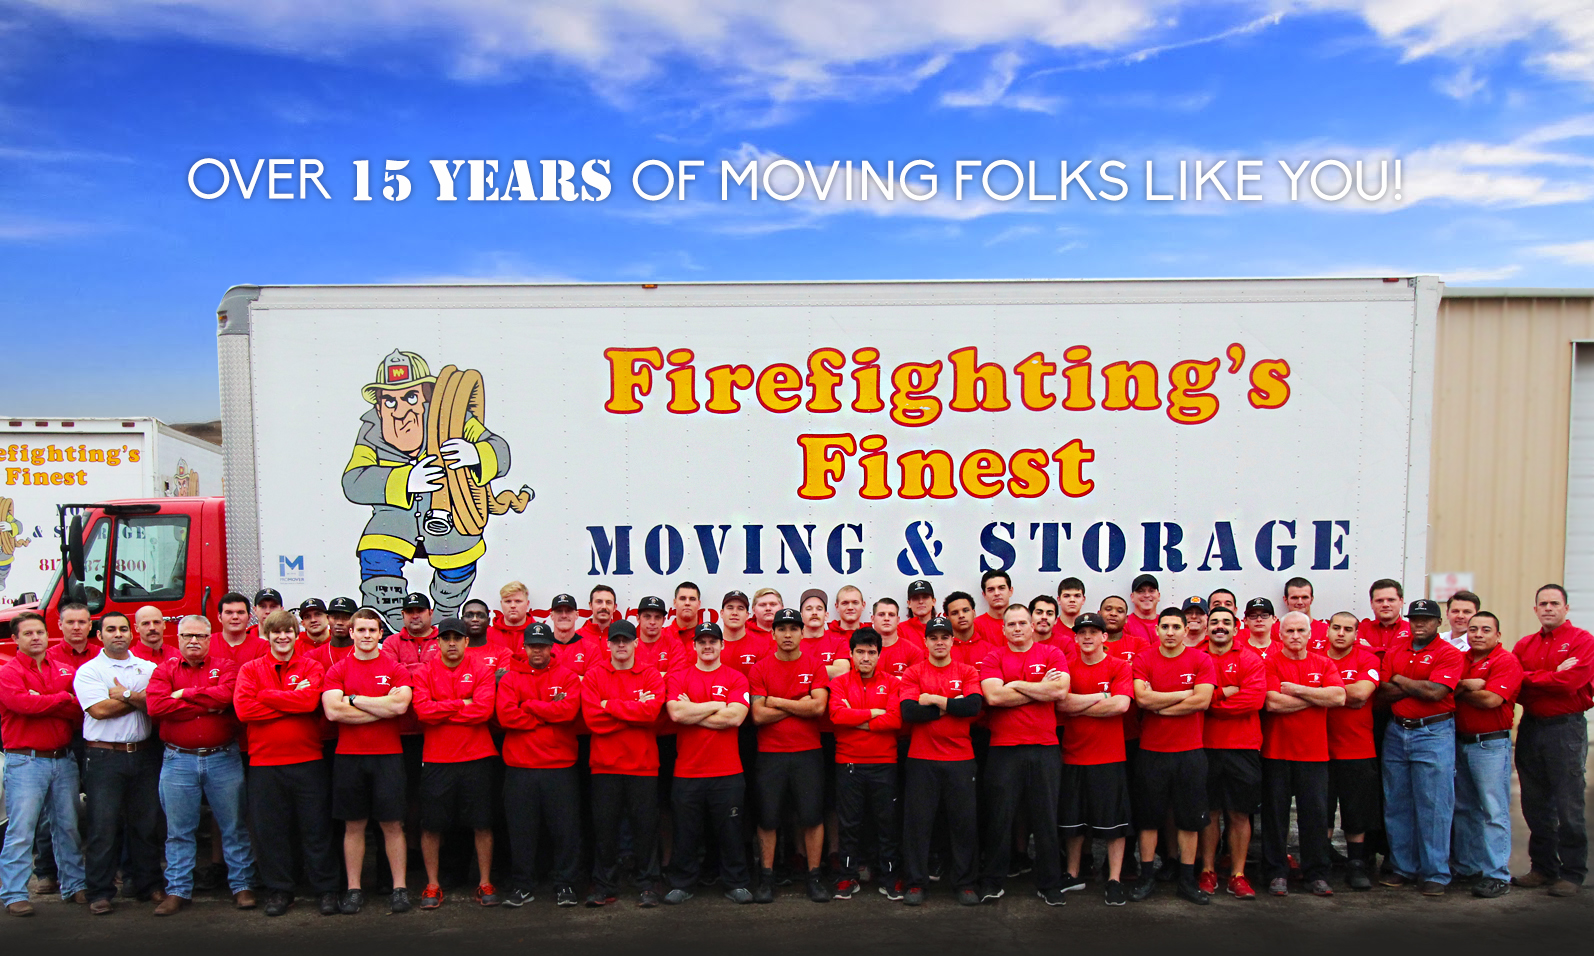 Firefighting's Finest Moving & Storage